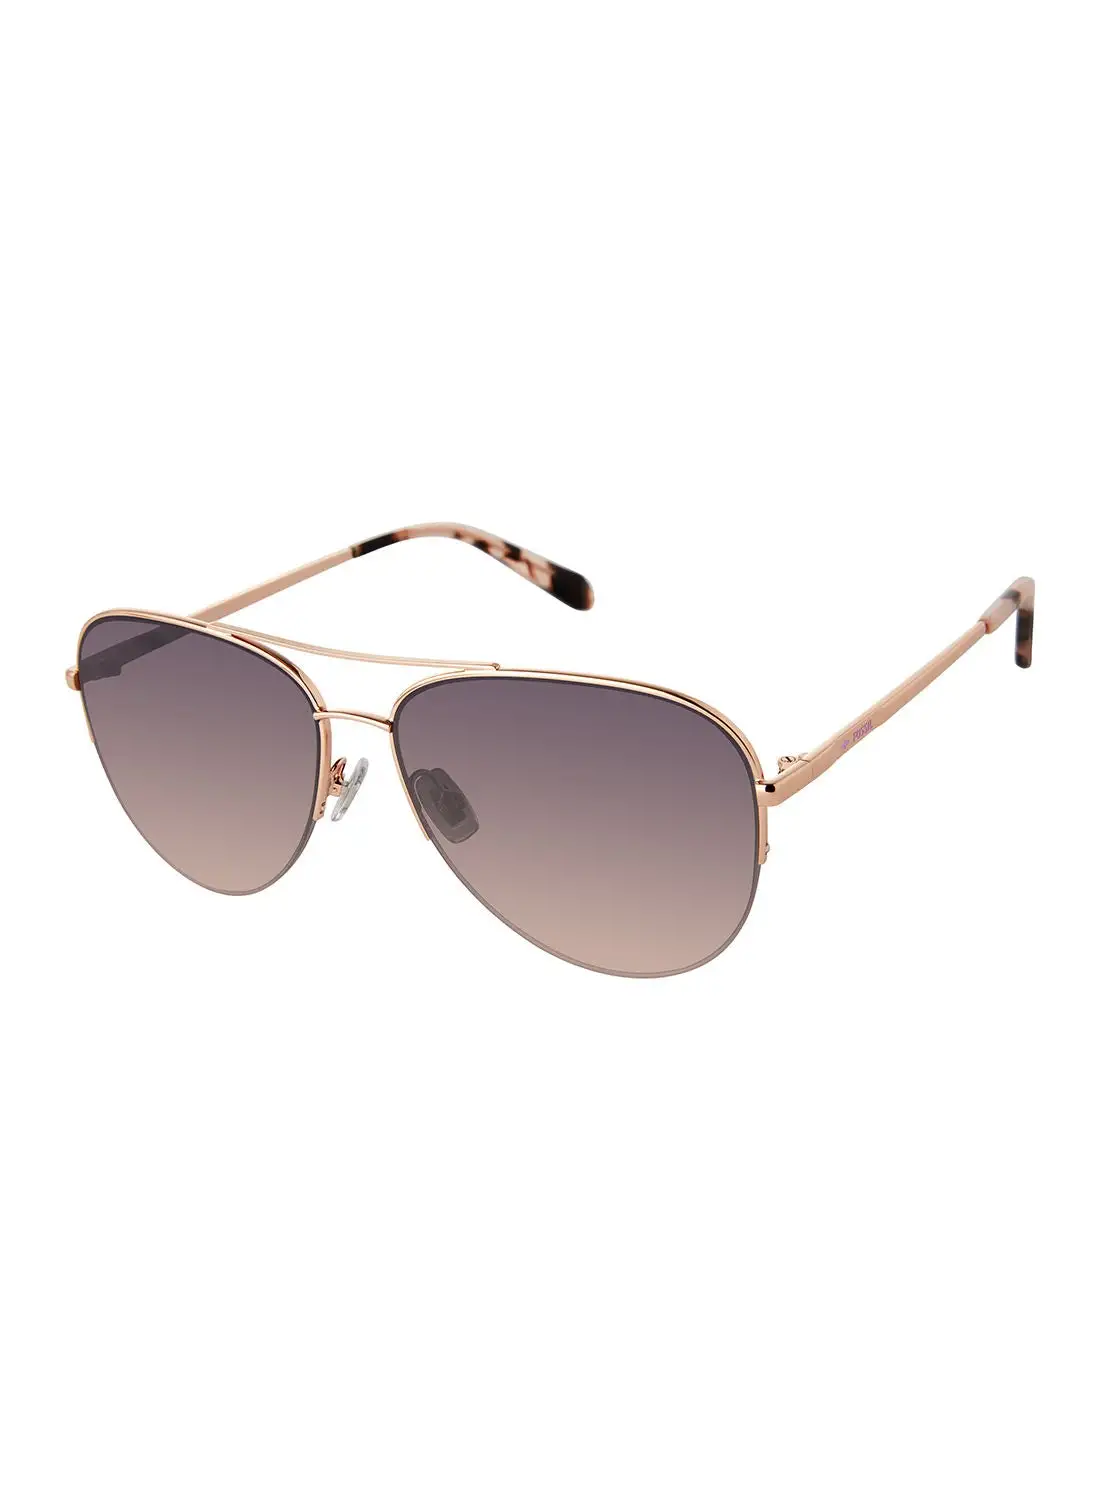 FOSSIL Women's UV Protection Pilot Sunglasses - Fos 3137/G/S Red Gold 58 - Lens Size: 58 Mm